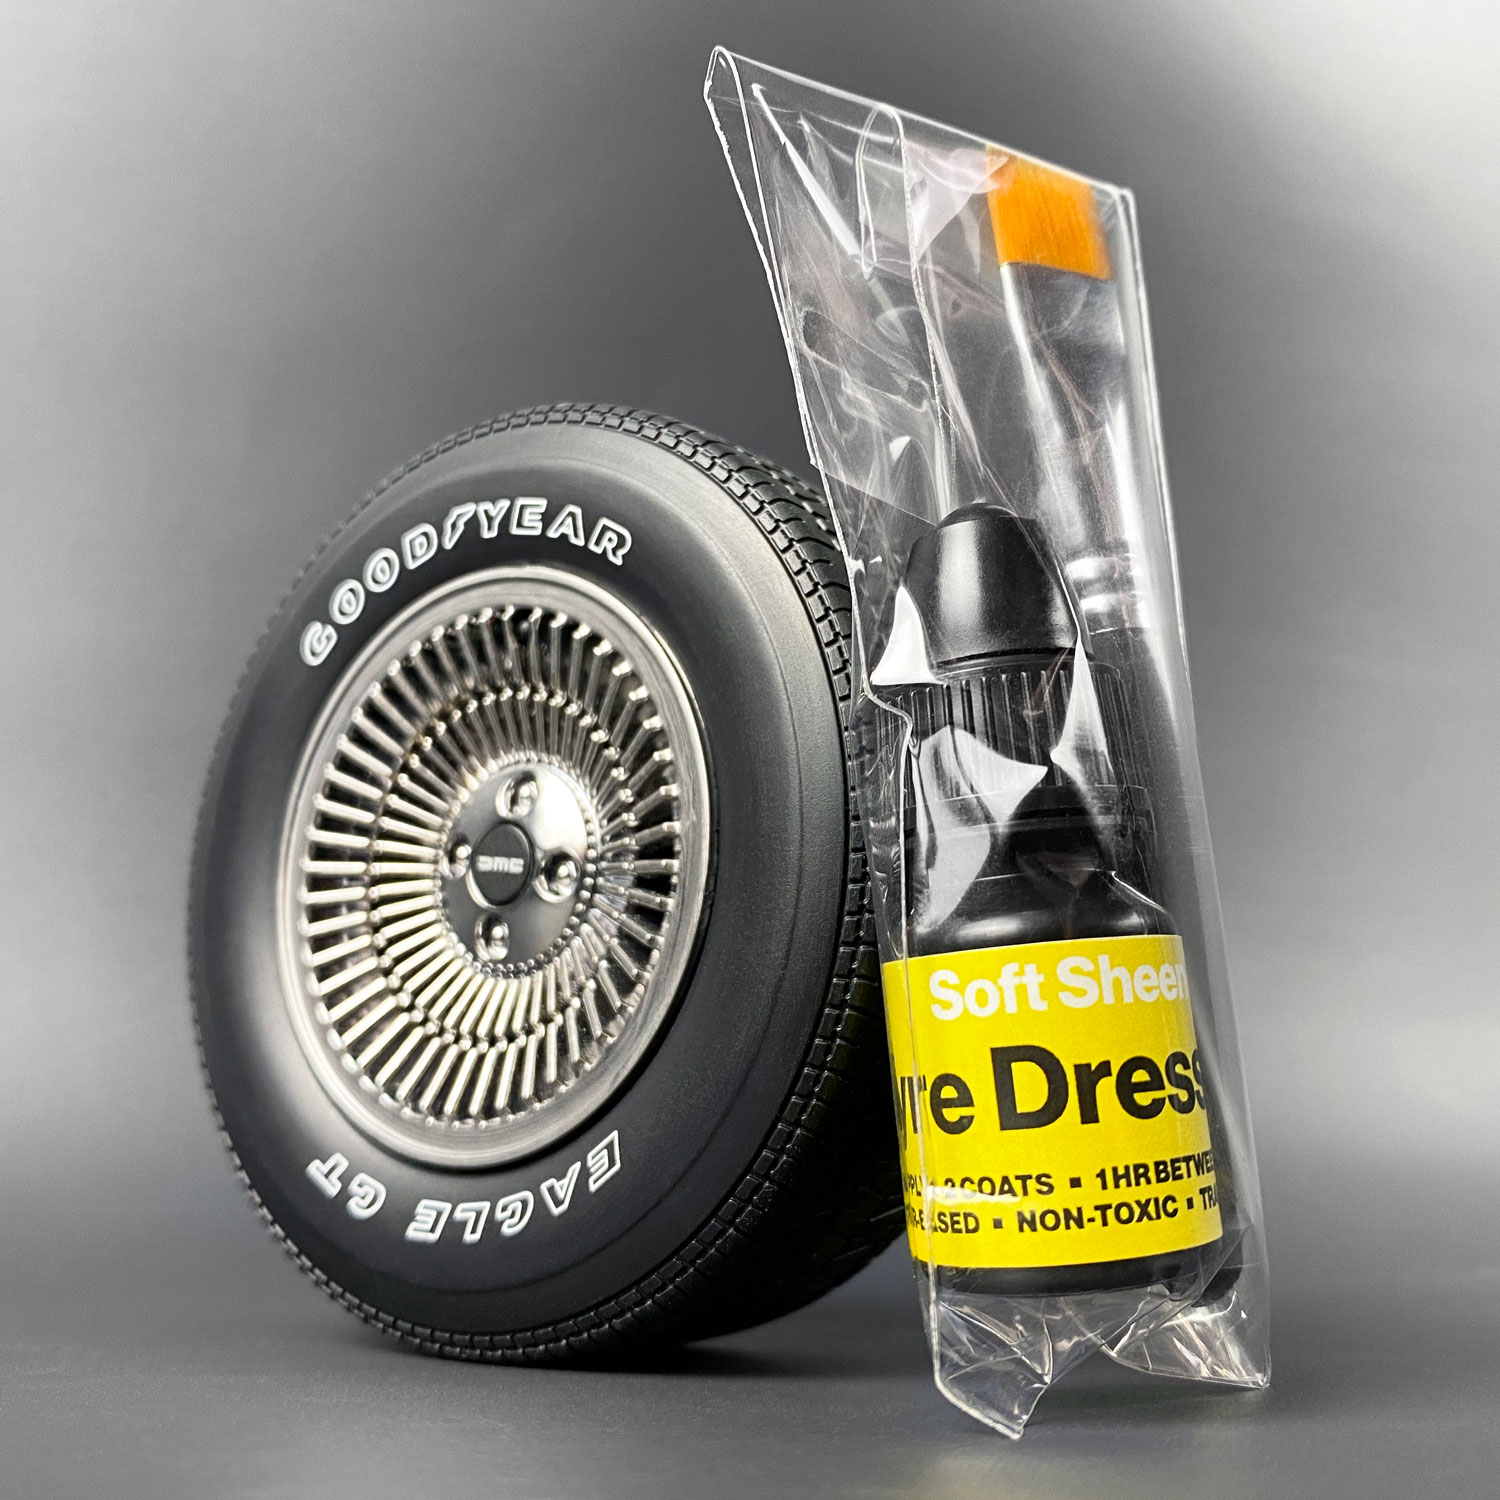 Tyre Dressing apllied to DeLorean tyre